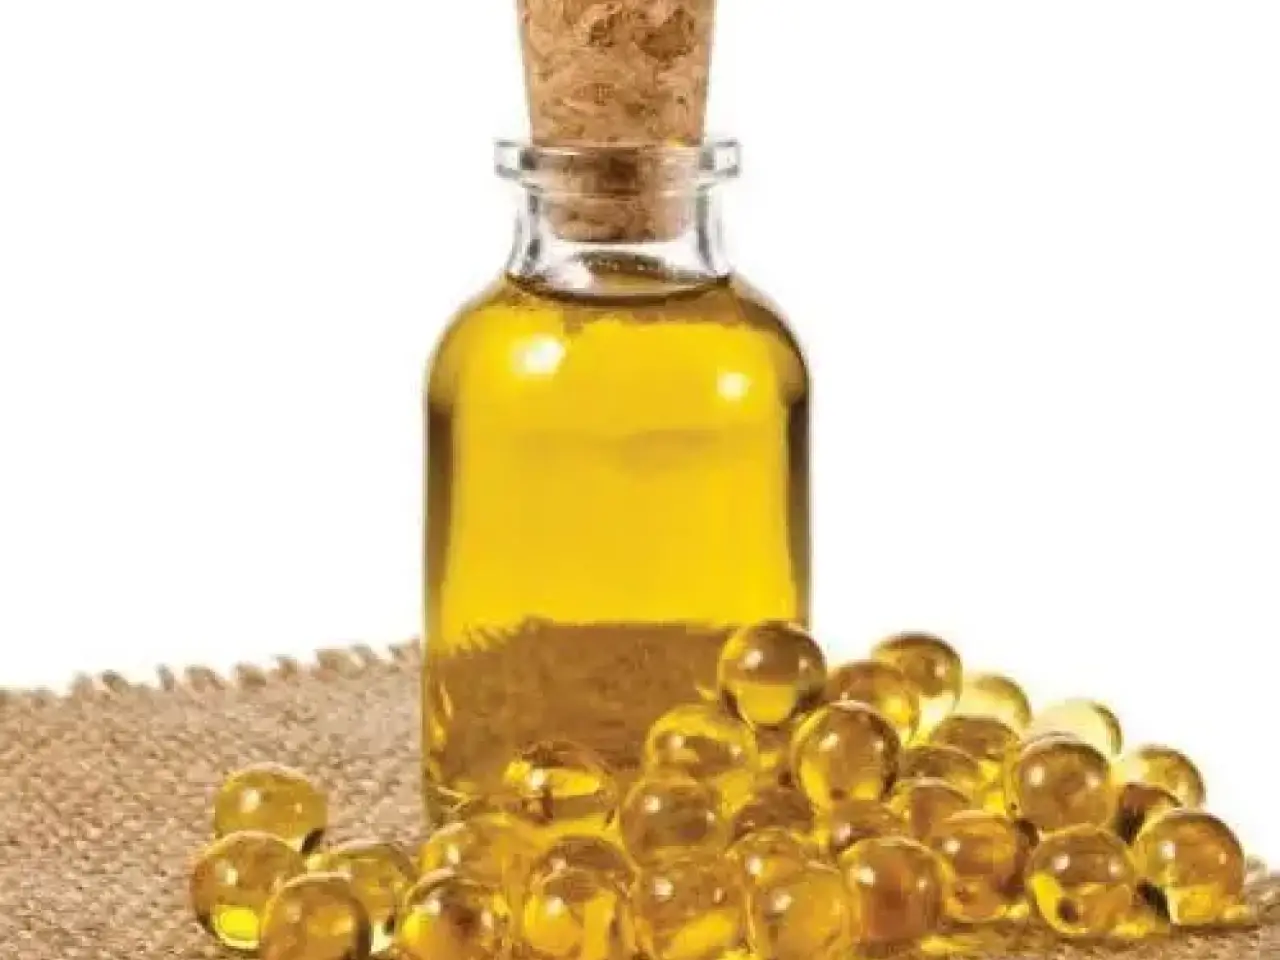 Fish Oil Market Size, Share, Growth, Analysis, Price, Trends and Forecast 2022-2027